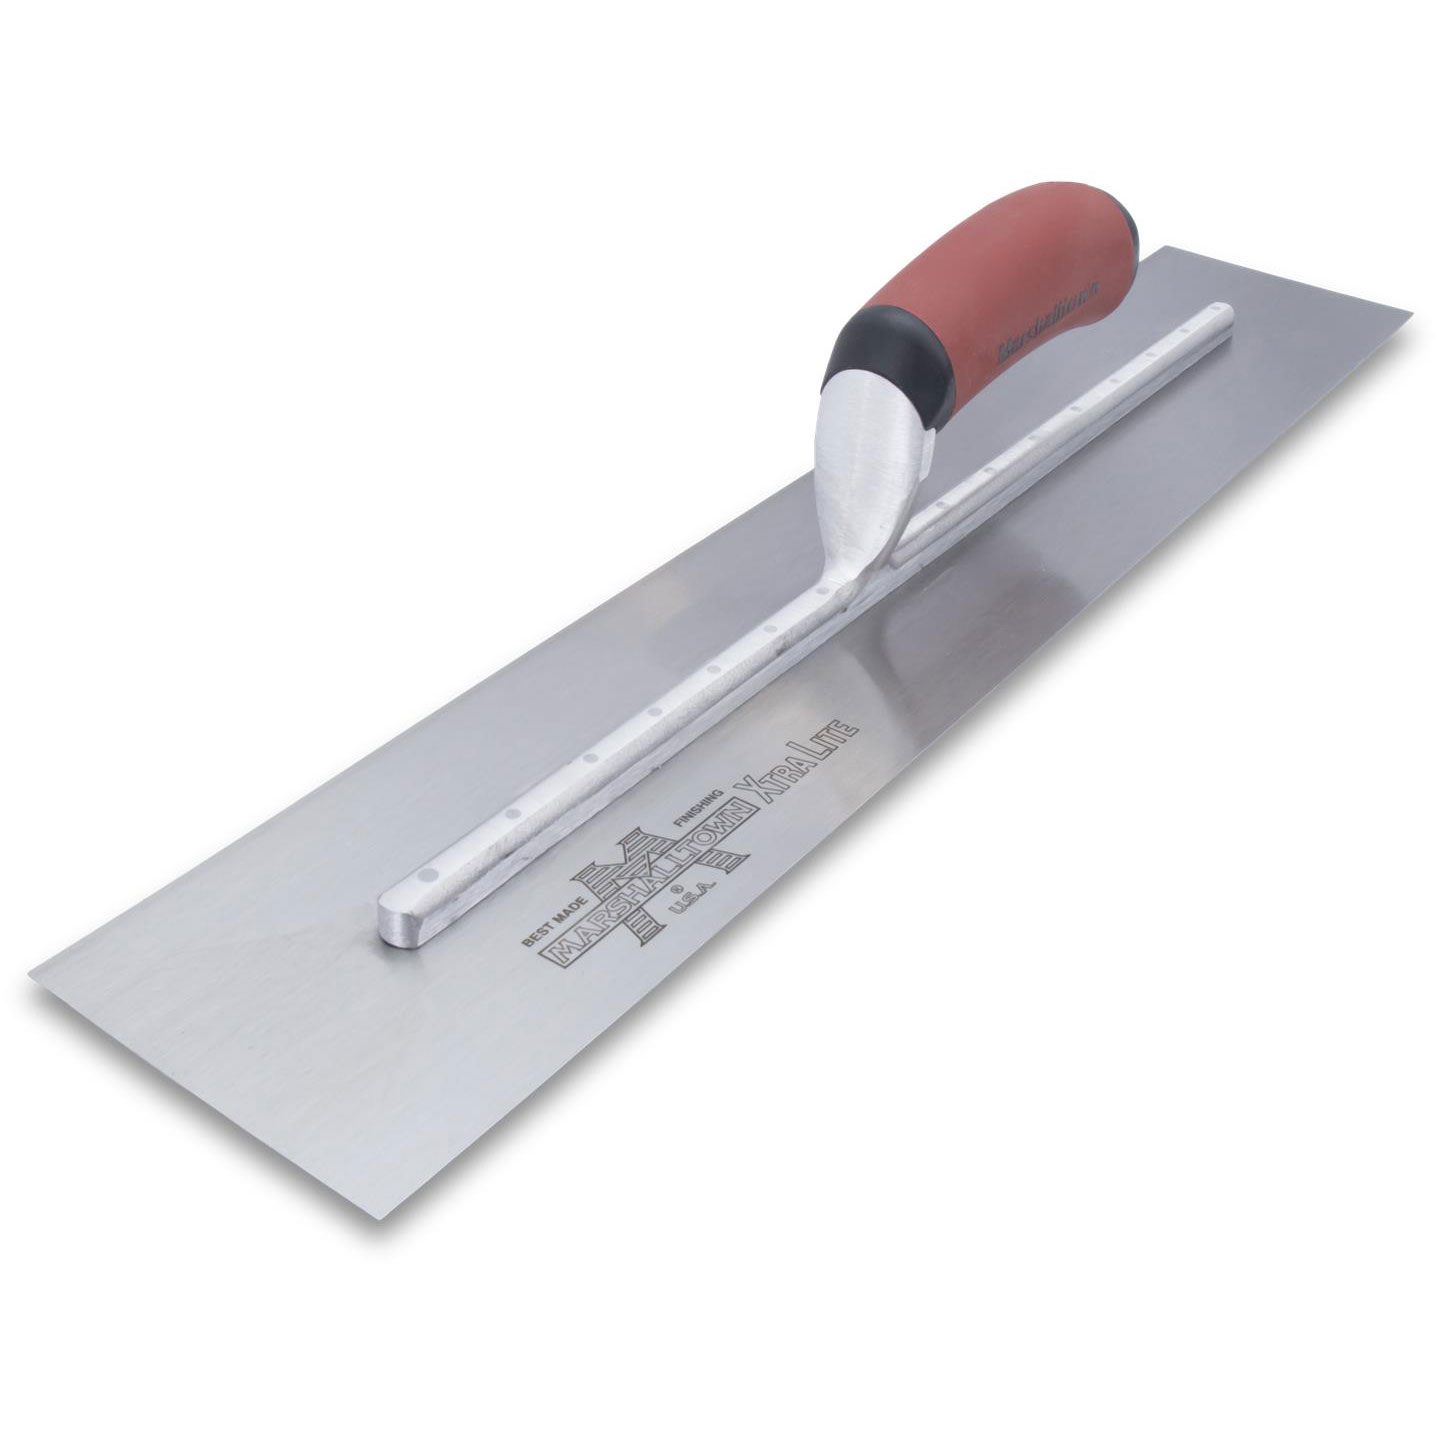 Marshalltown MXS20D 20in. x 4in. Finishing Trowel Curved DuraSoft Handle MAT-MXS20D